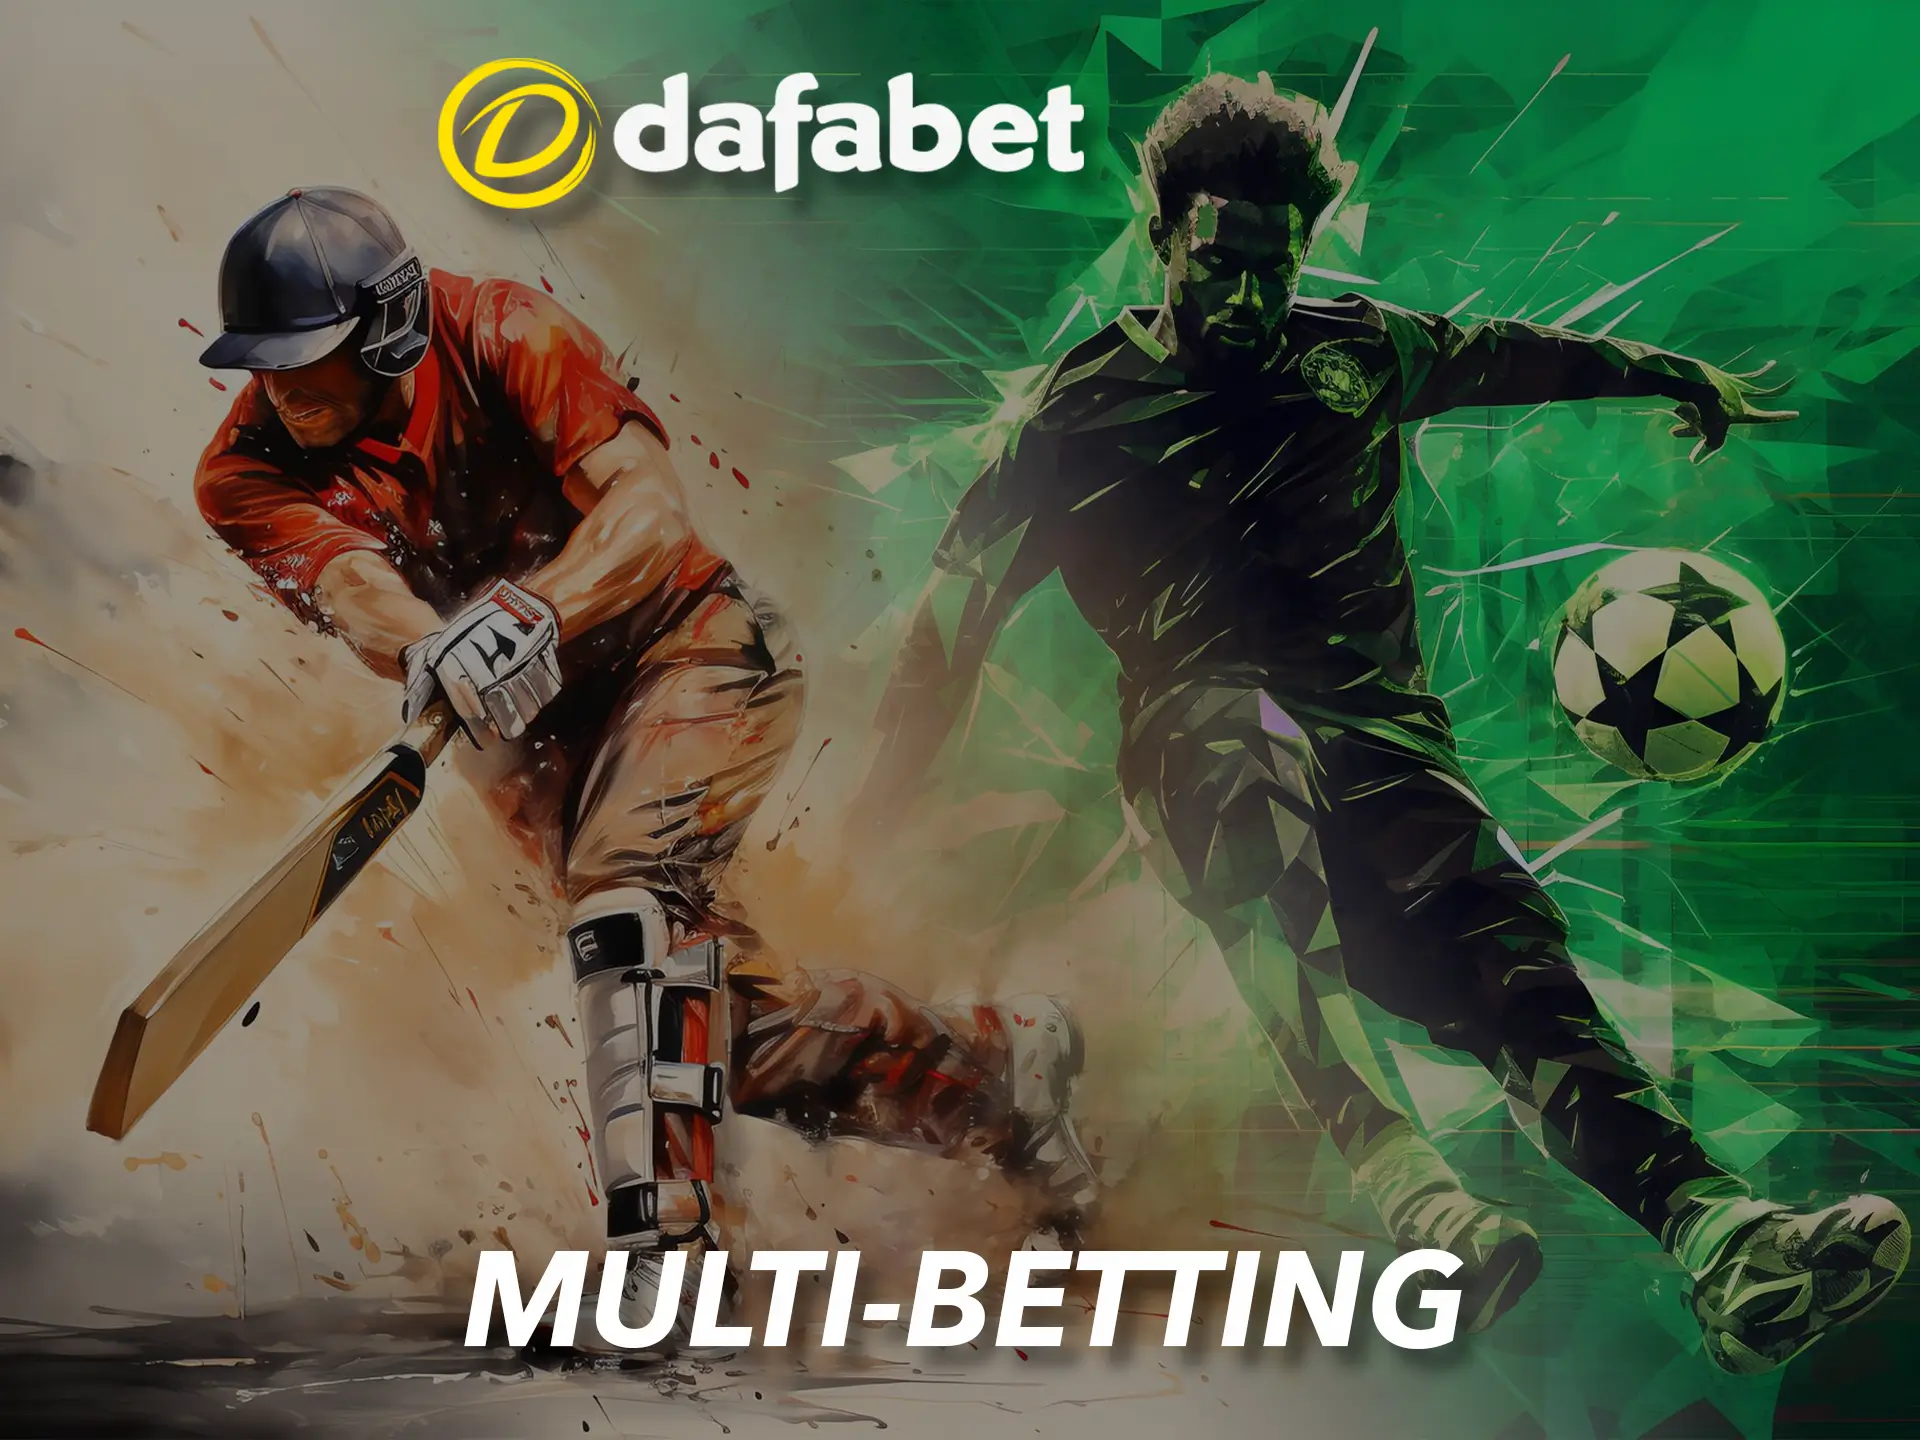 Use Multi betting at Dafabet to bet on different sports disciplines.